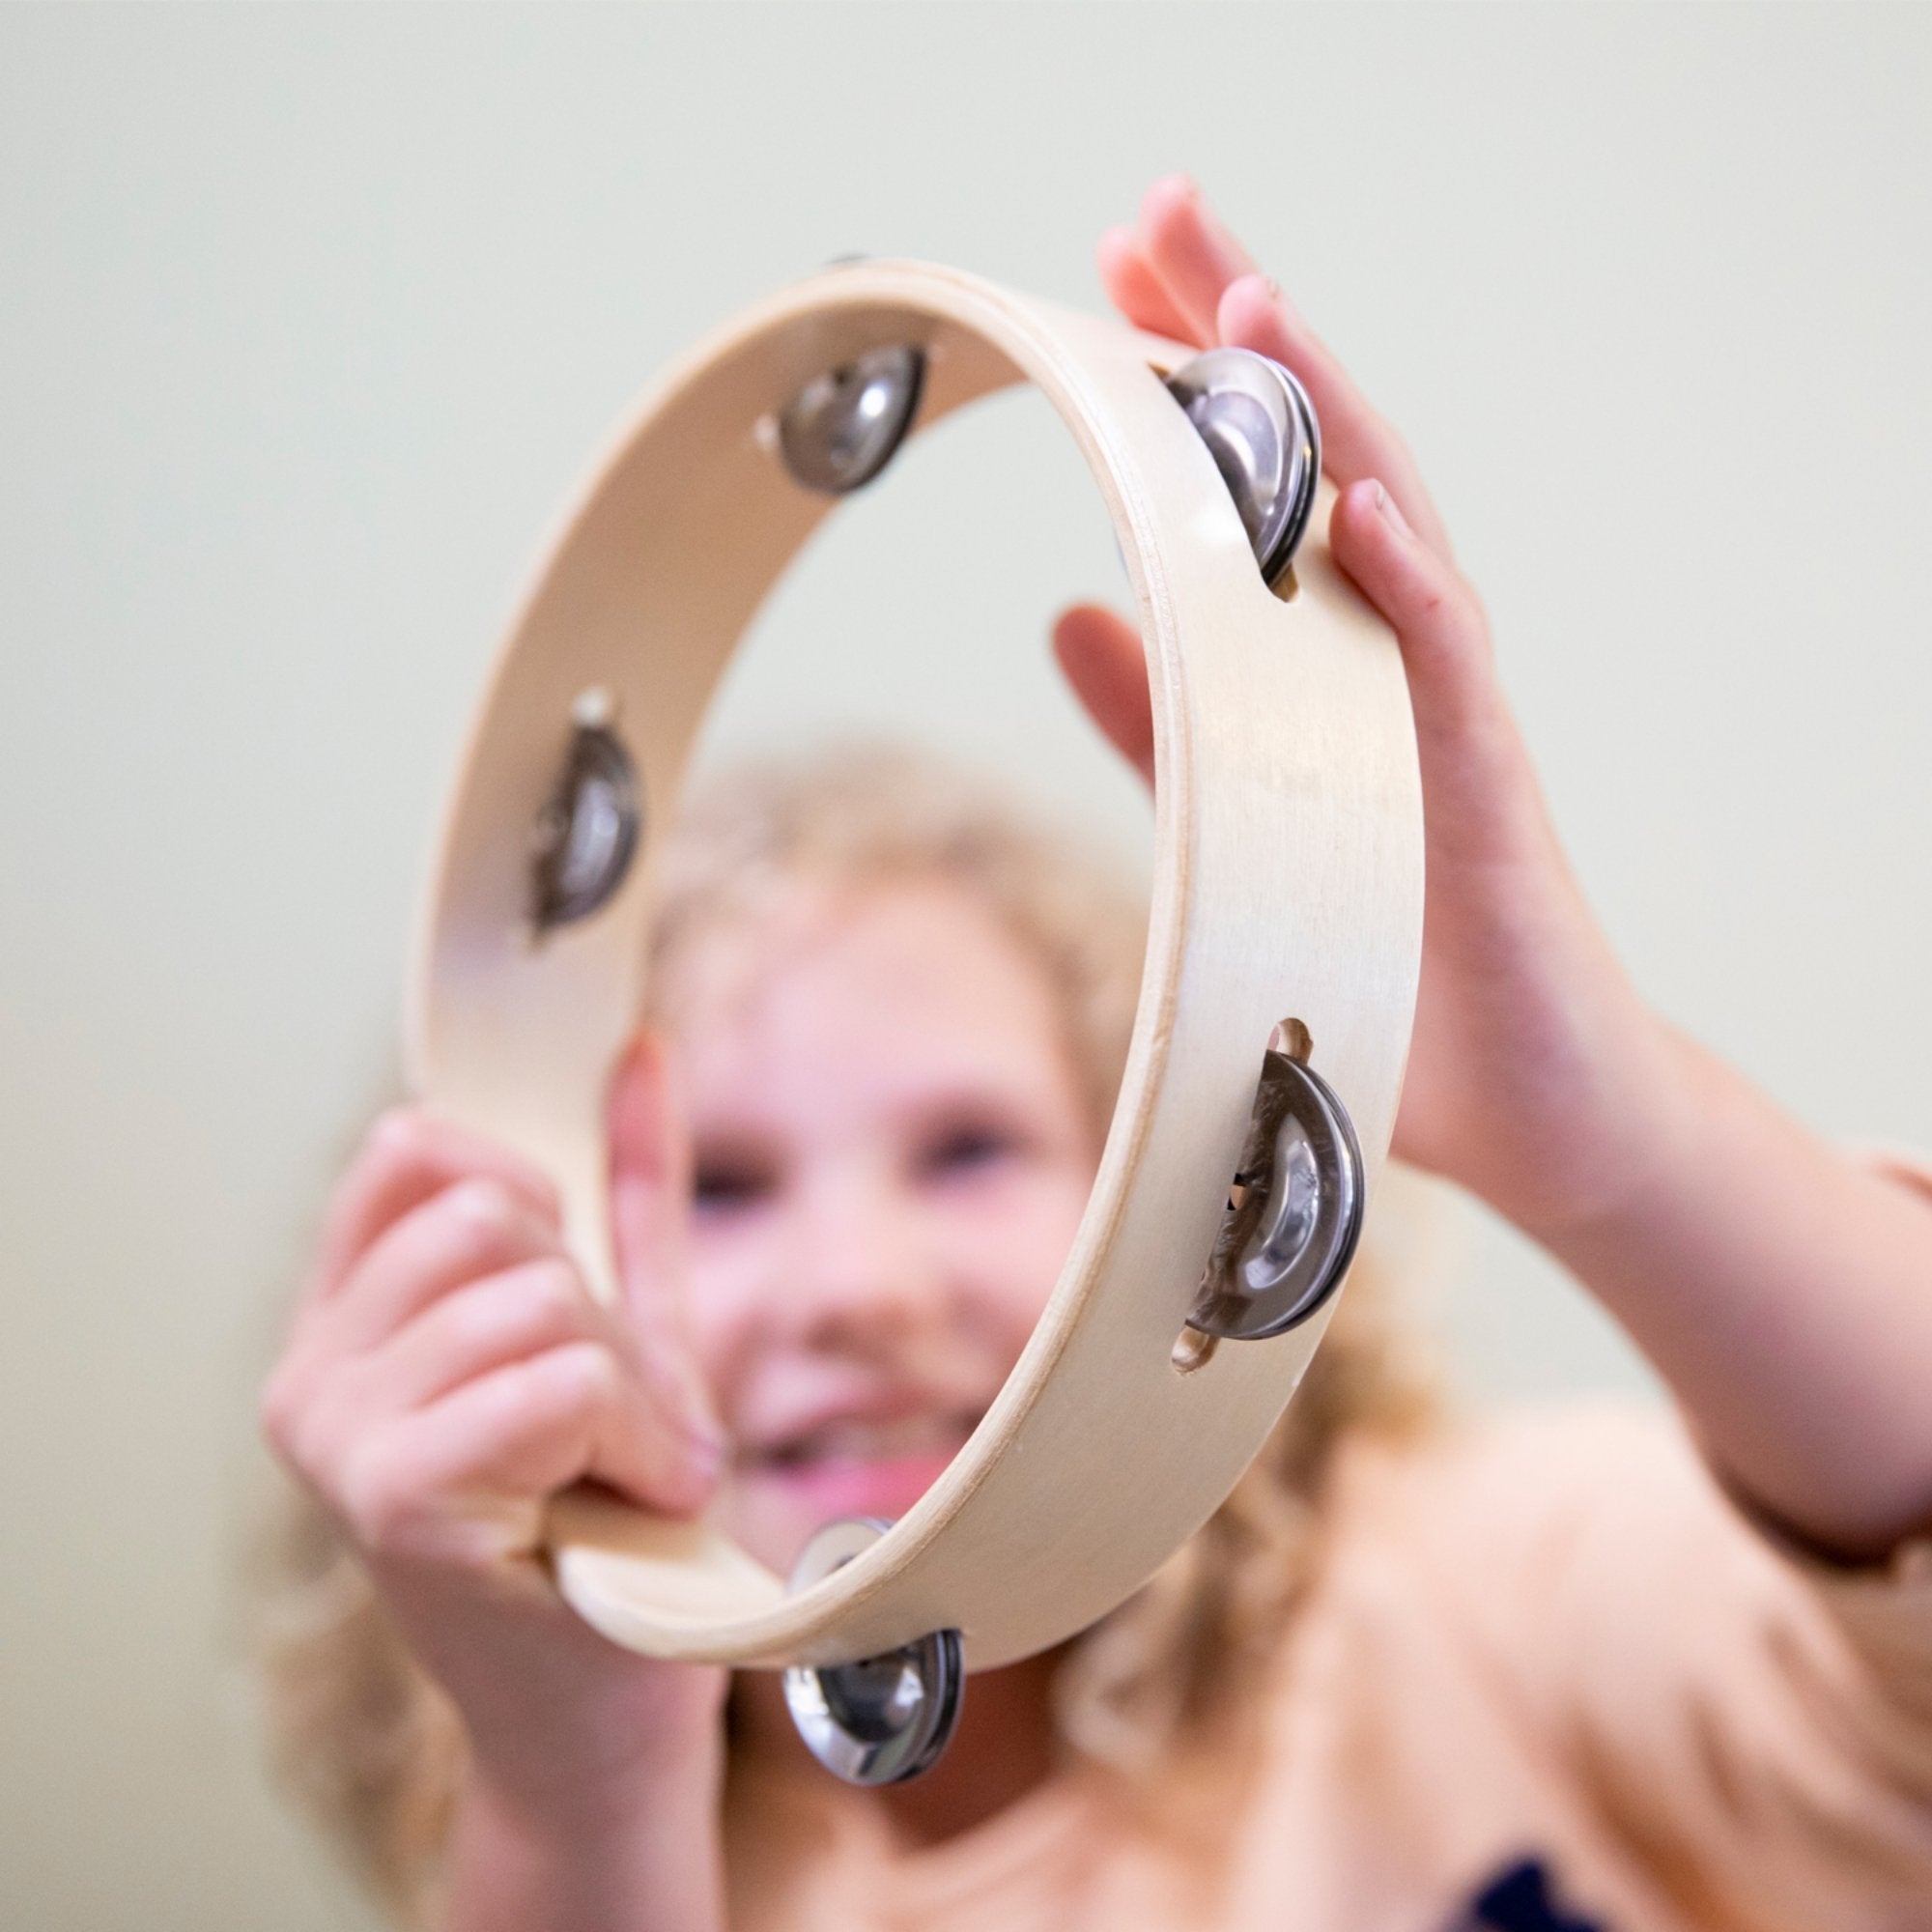 Headless Tambourine 5 Pairs Jingle, Introducing our Headless Tambourine! This delightful musical instrument is perfect for children who love to make music and explore their rhythmic abilities. With its wooden rim and five pairs of jingles, this tambourine offers a vibrant and resonant sound that will captivate any young musician.Designed specifically for little hands, this Headless Tambourine not only allows children to create a wide range of sounds but also helps develop their rhythm and timing skills. By 